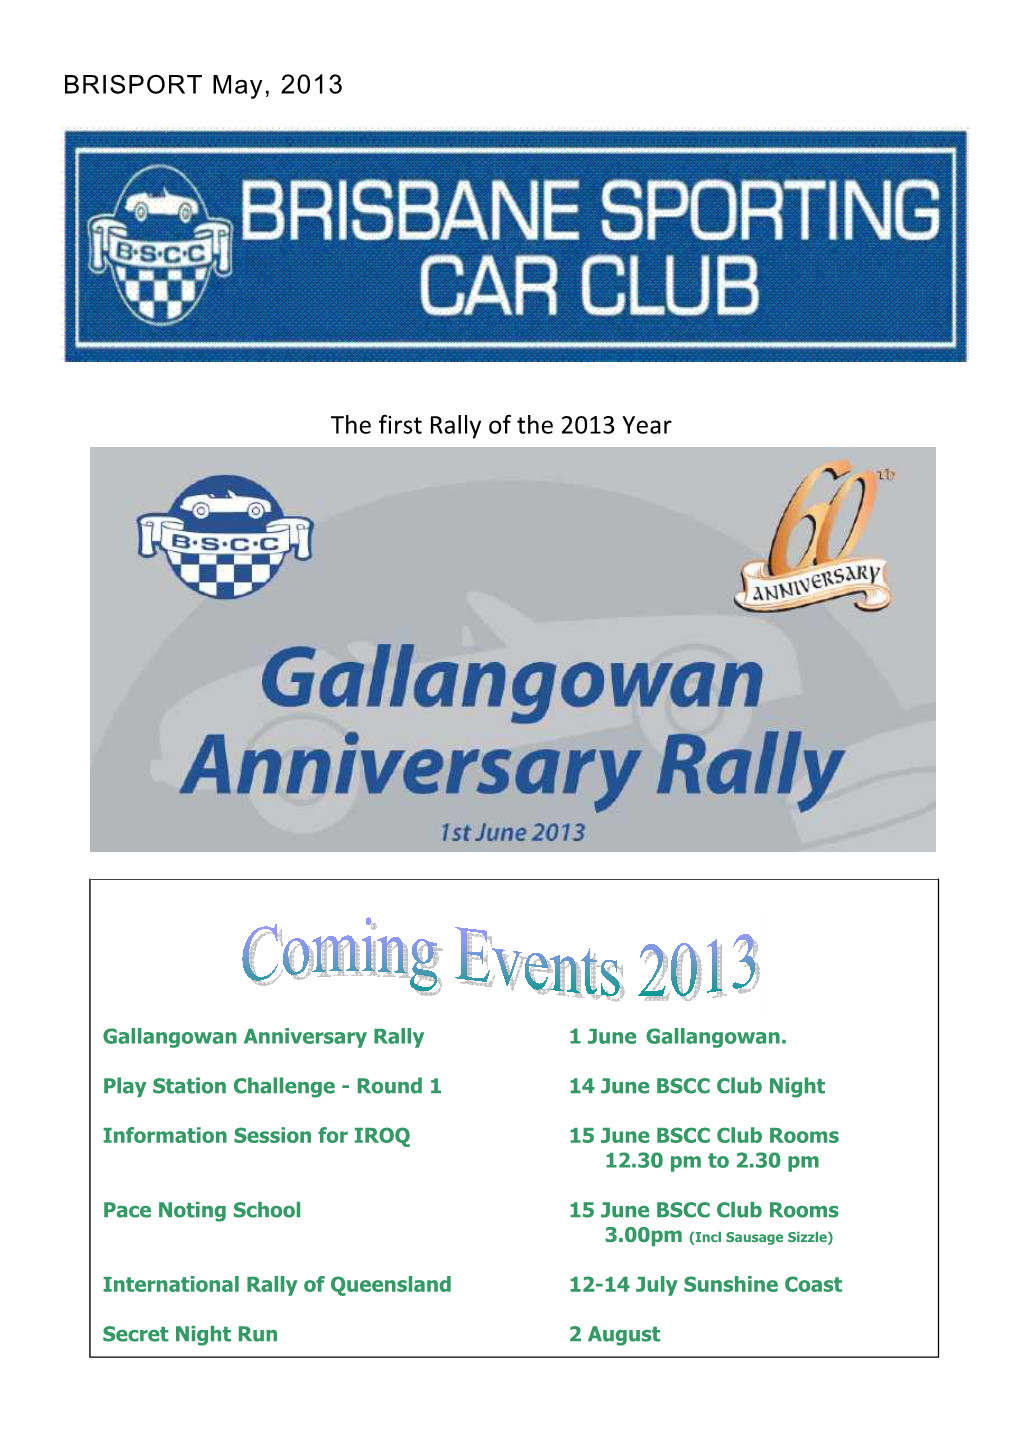 The First Rally of the 2013 Year